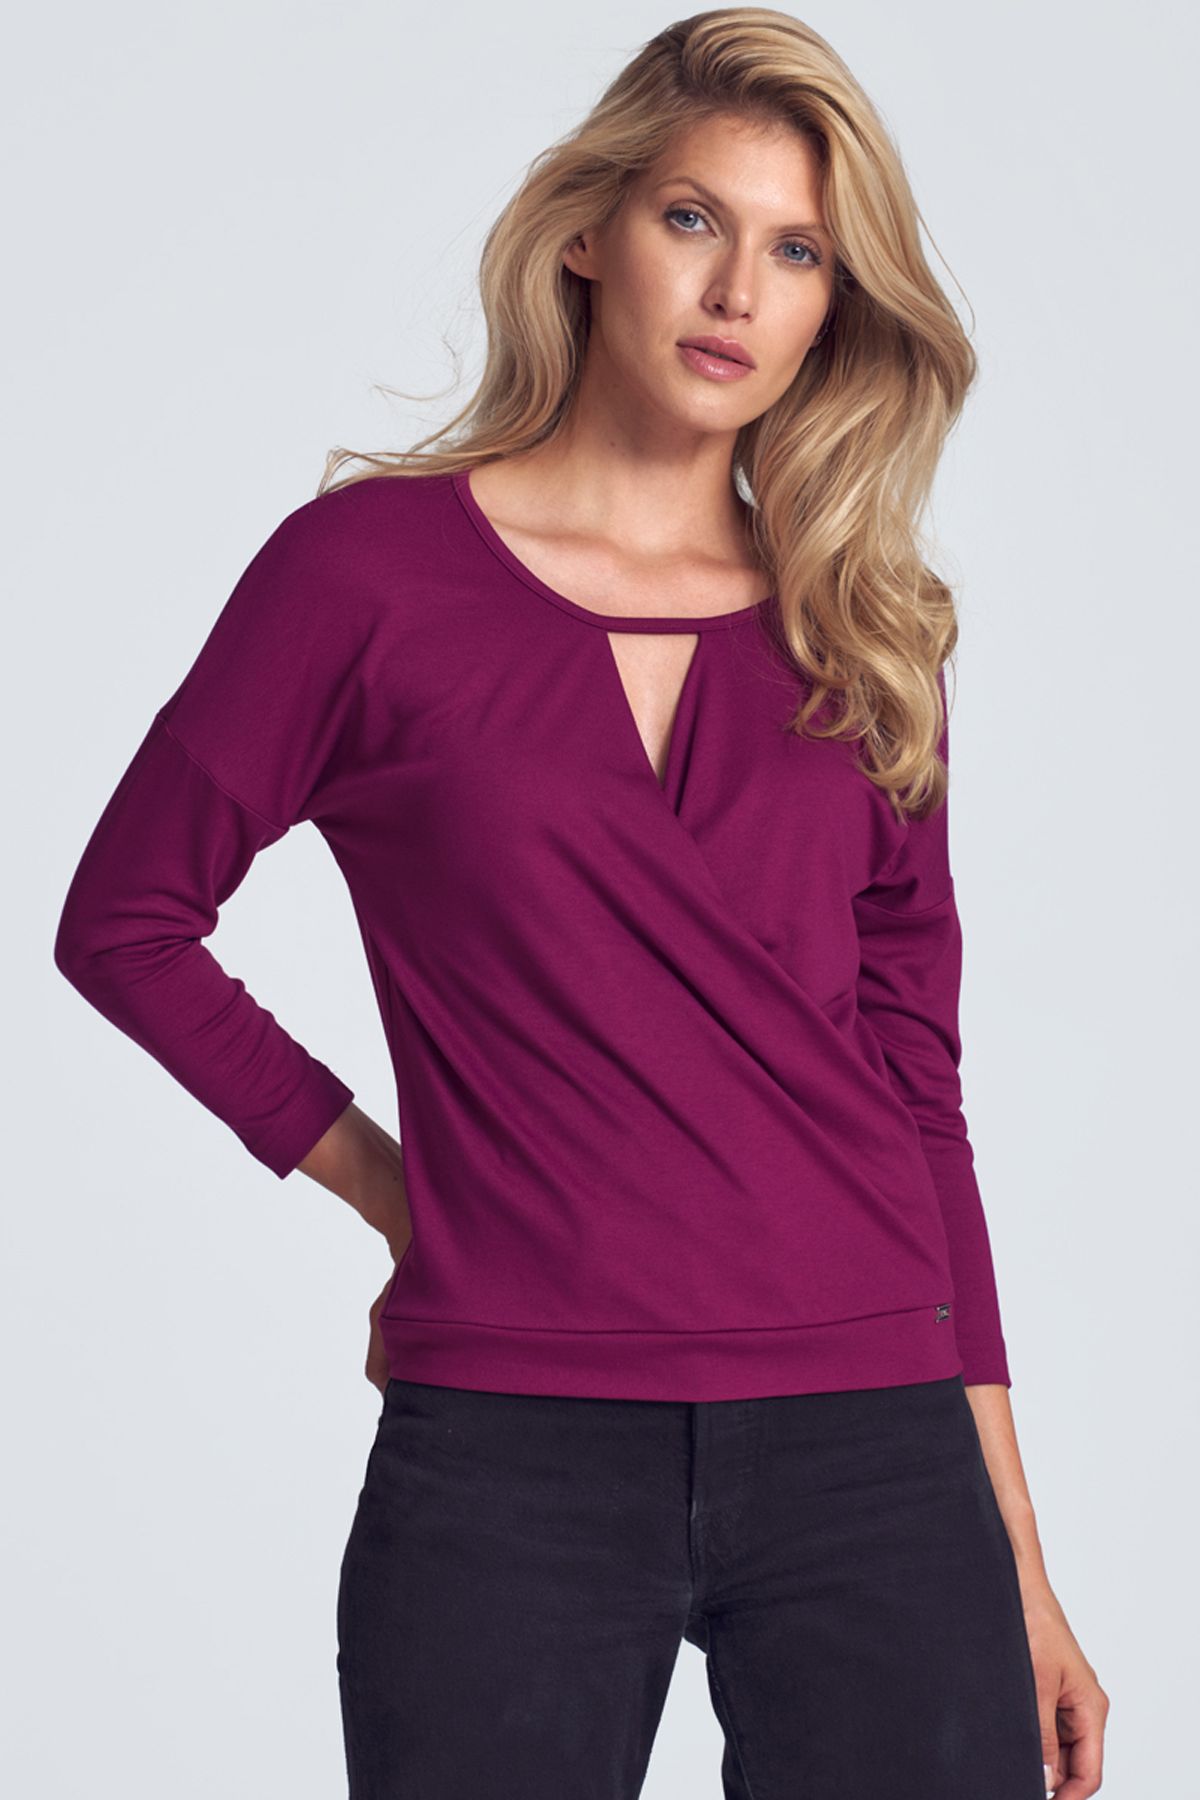 Fuchsia elegant short blouse with wrap neckline finished with decorative trimming, charming falling shoulder, ¾ sleeve, bottom finished with welt.